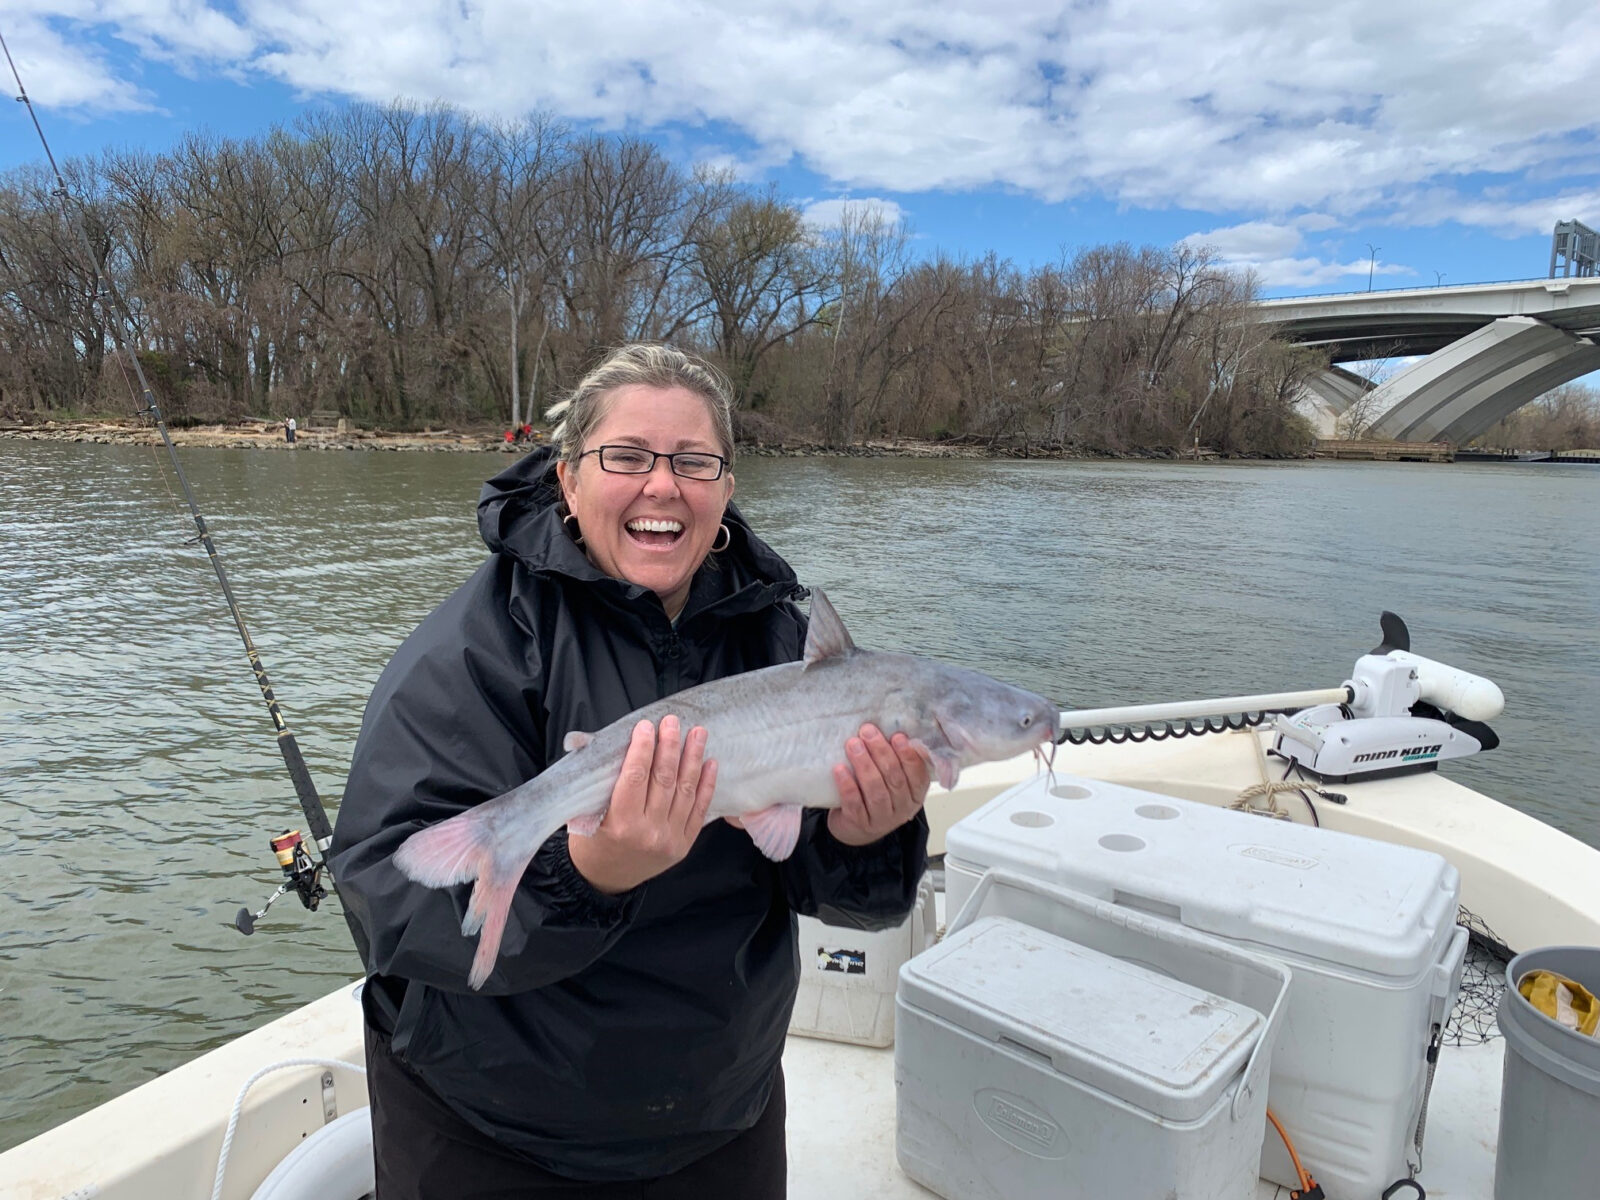 https://indianheadcharters.com/wp-content/uploads/2019/04/March-31st-1600x1200.jpg